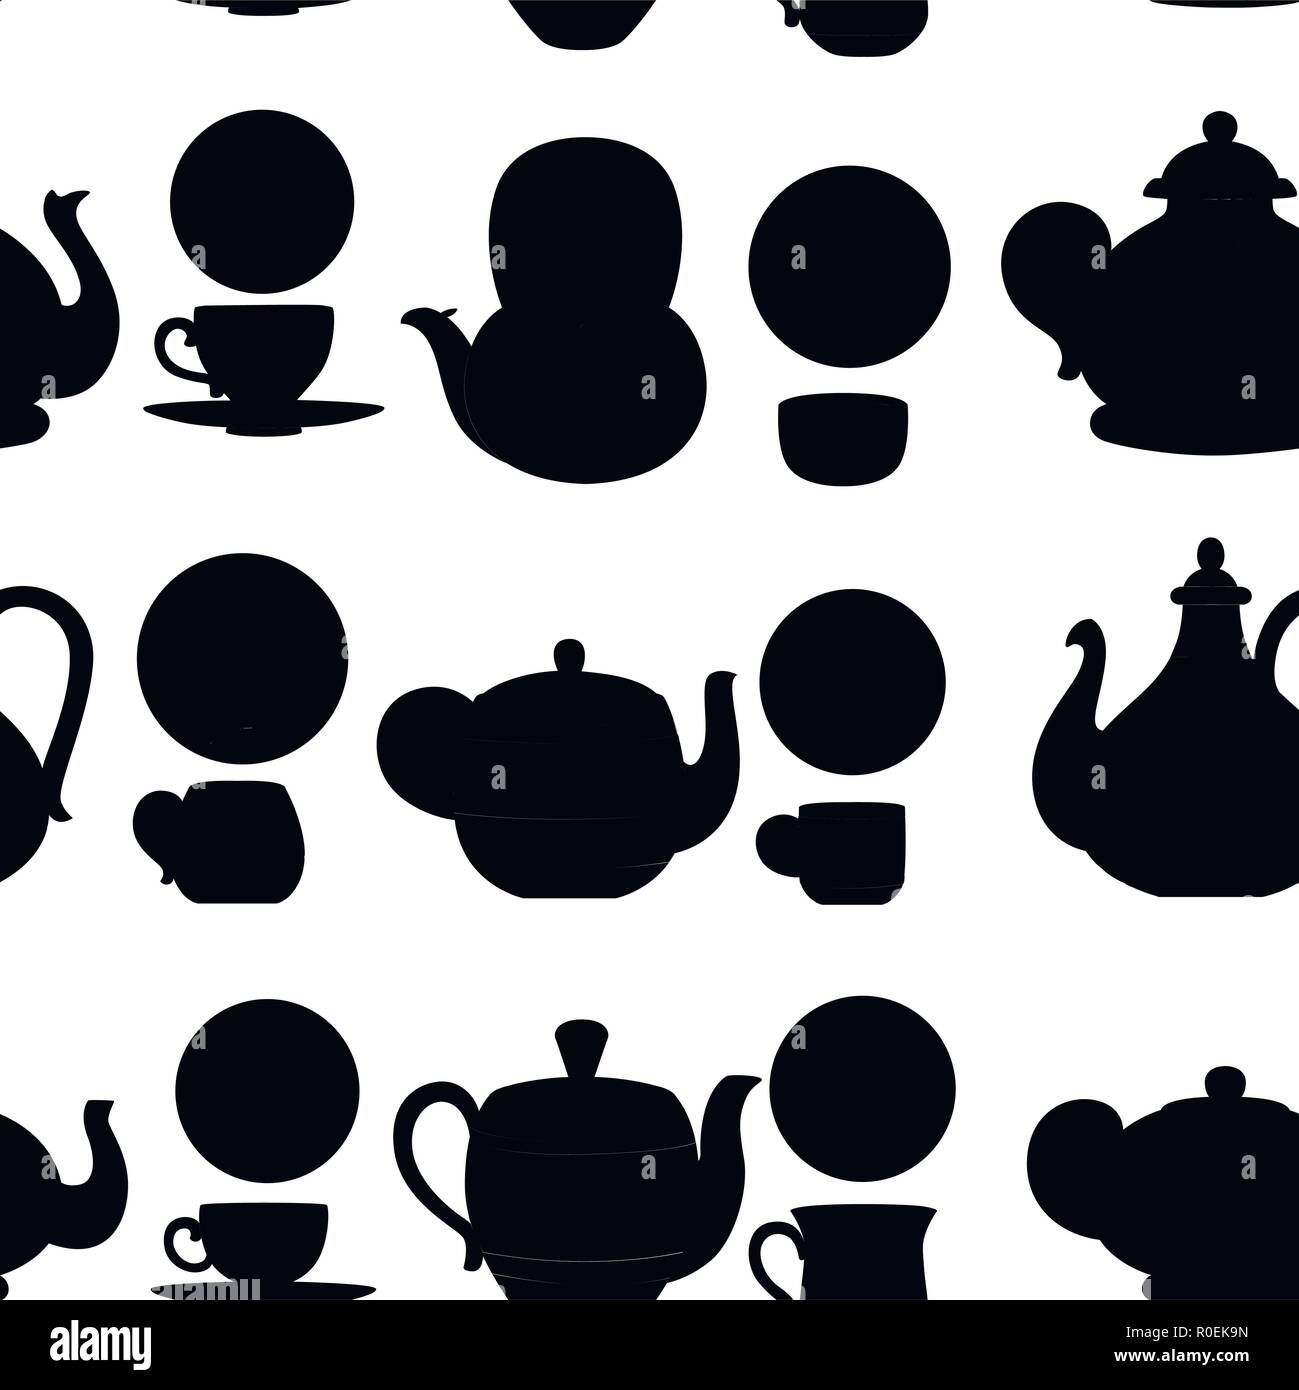 Trendy cute patterns black and white Seamless Pattern Black Silhouette Vector Set Of Teapots And Cups With Cute Patterns Tea Cartoon Style Design Flat Illustration On White Stock Image Art Alamy